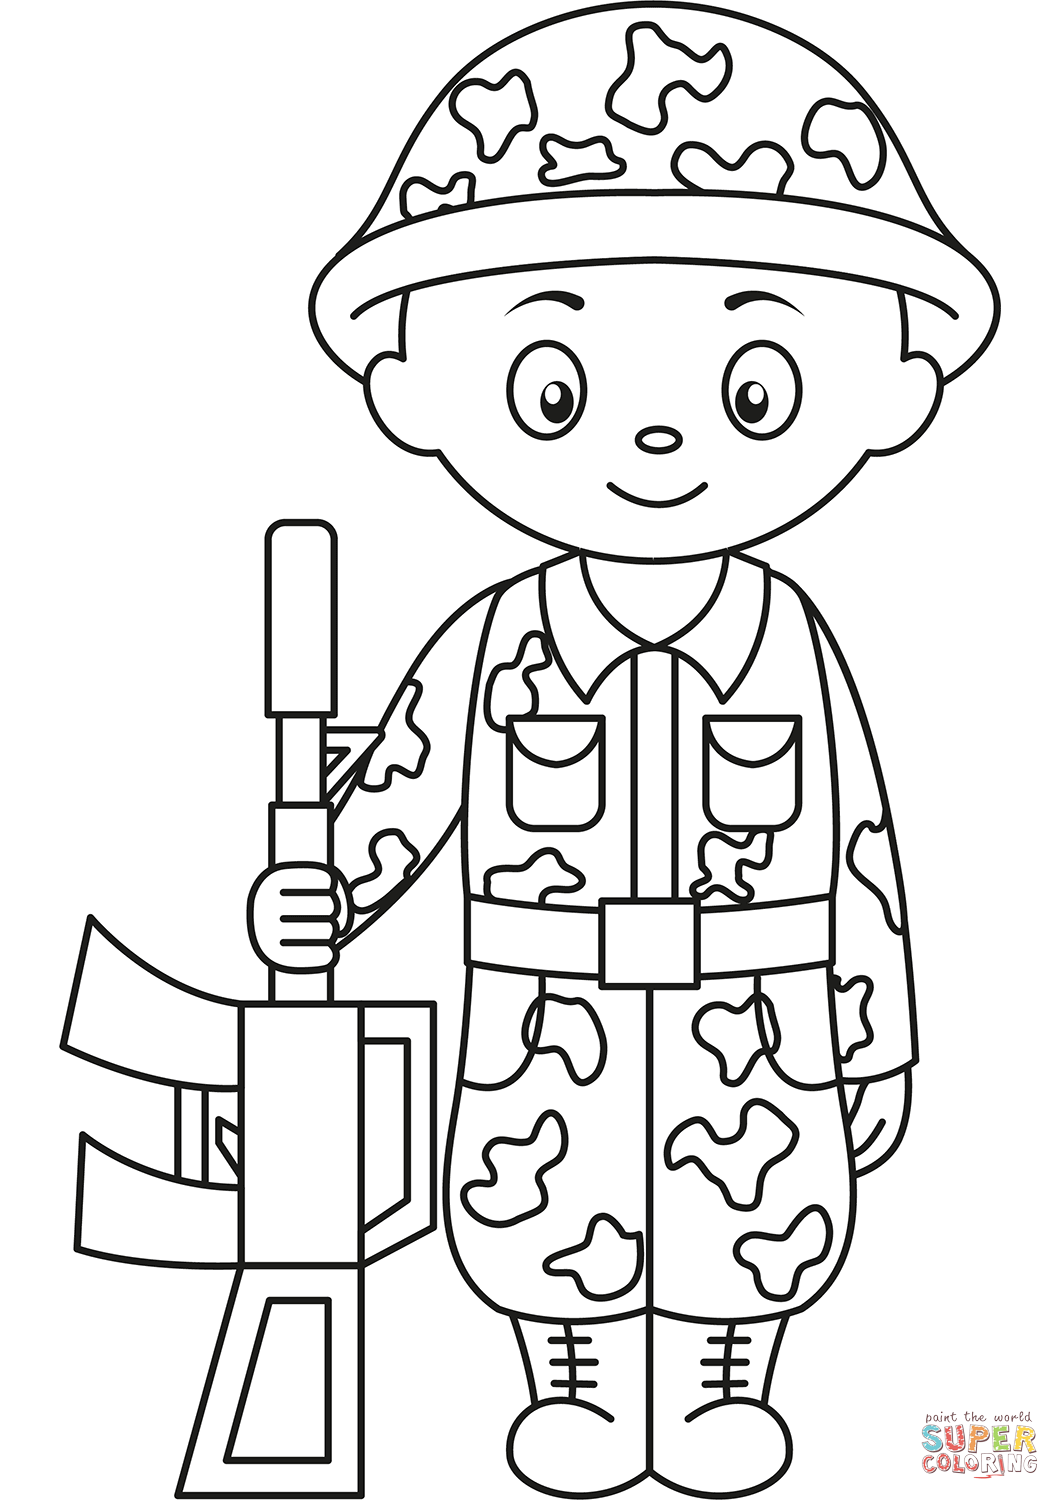 Cute soldier coloring page free printable coloring pages